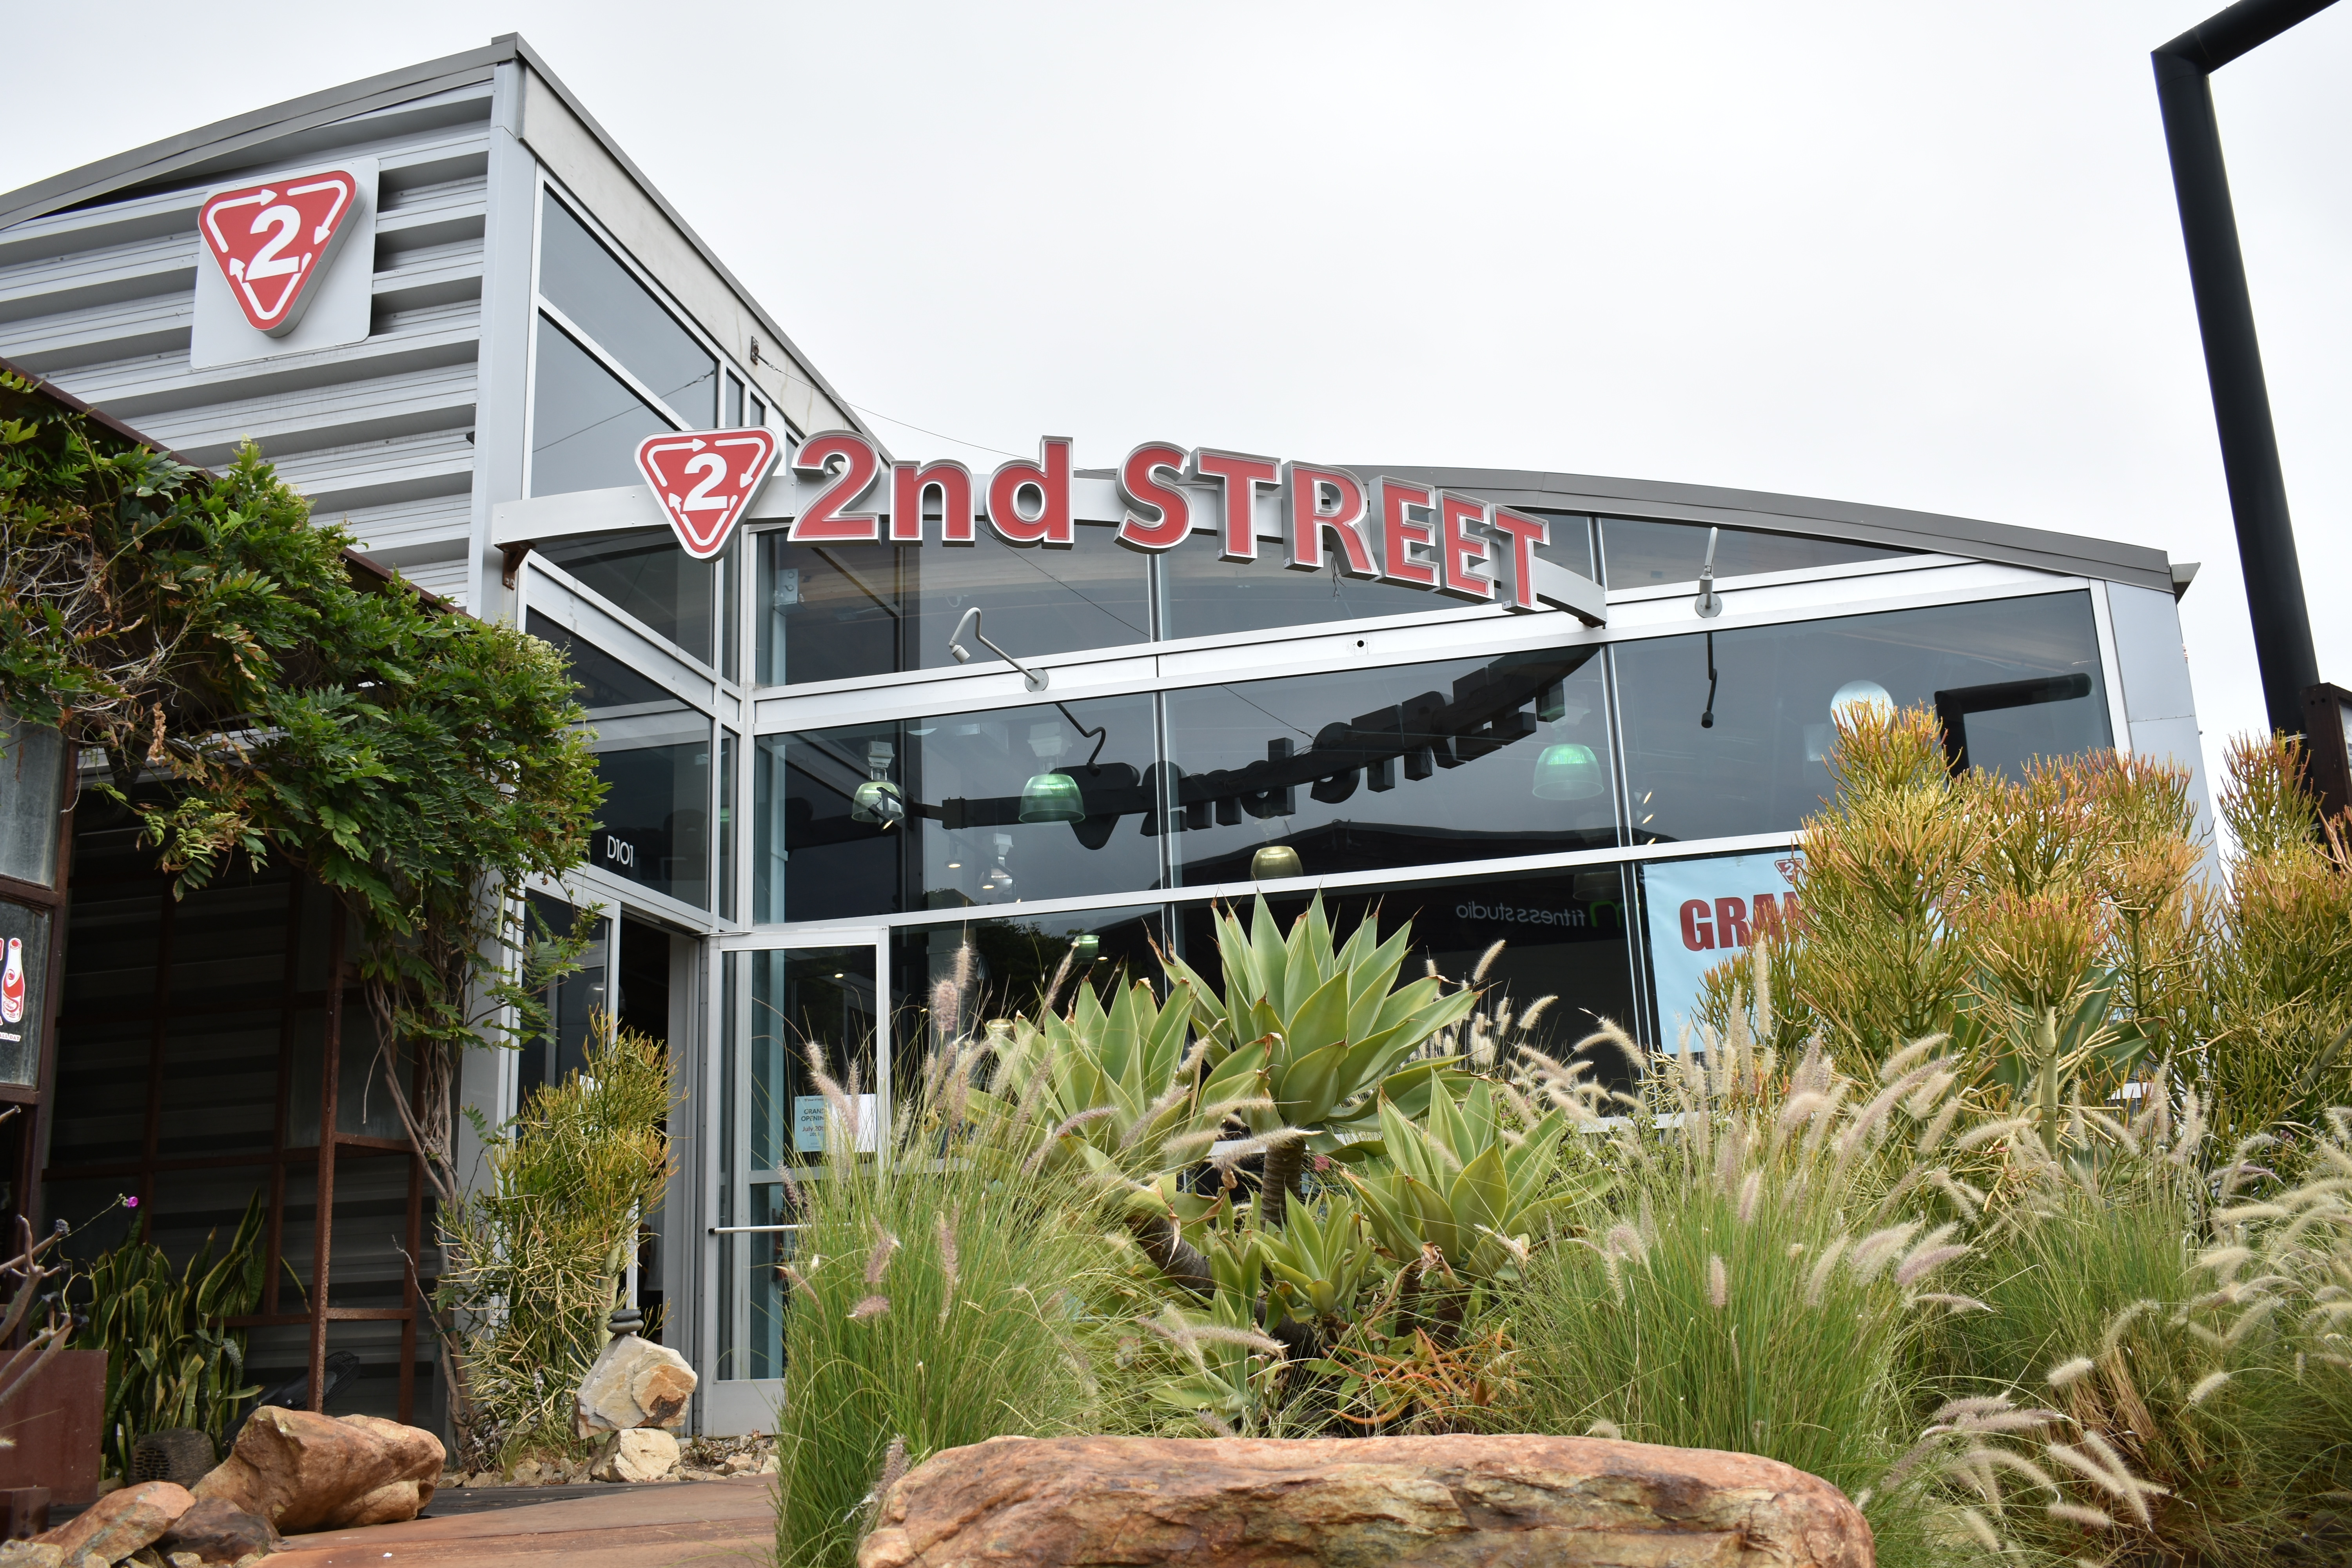 2nd STREET USA Inc To Open Third American Store In Costa Mesa